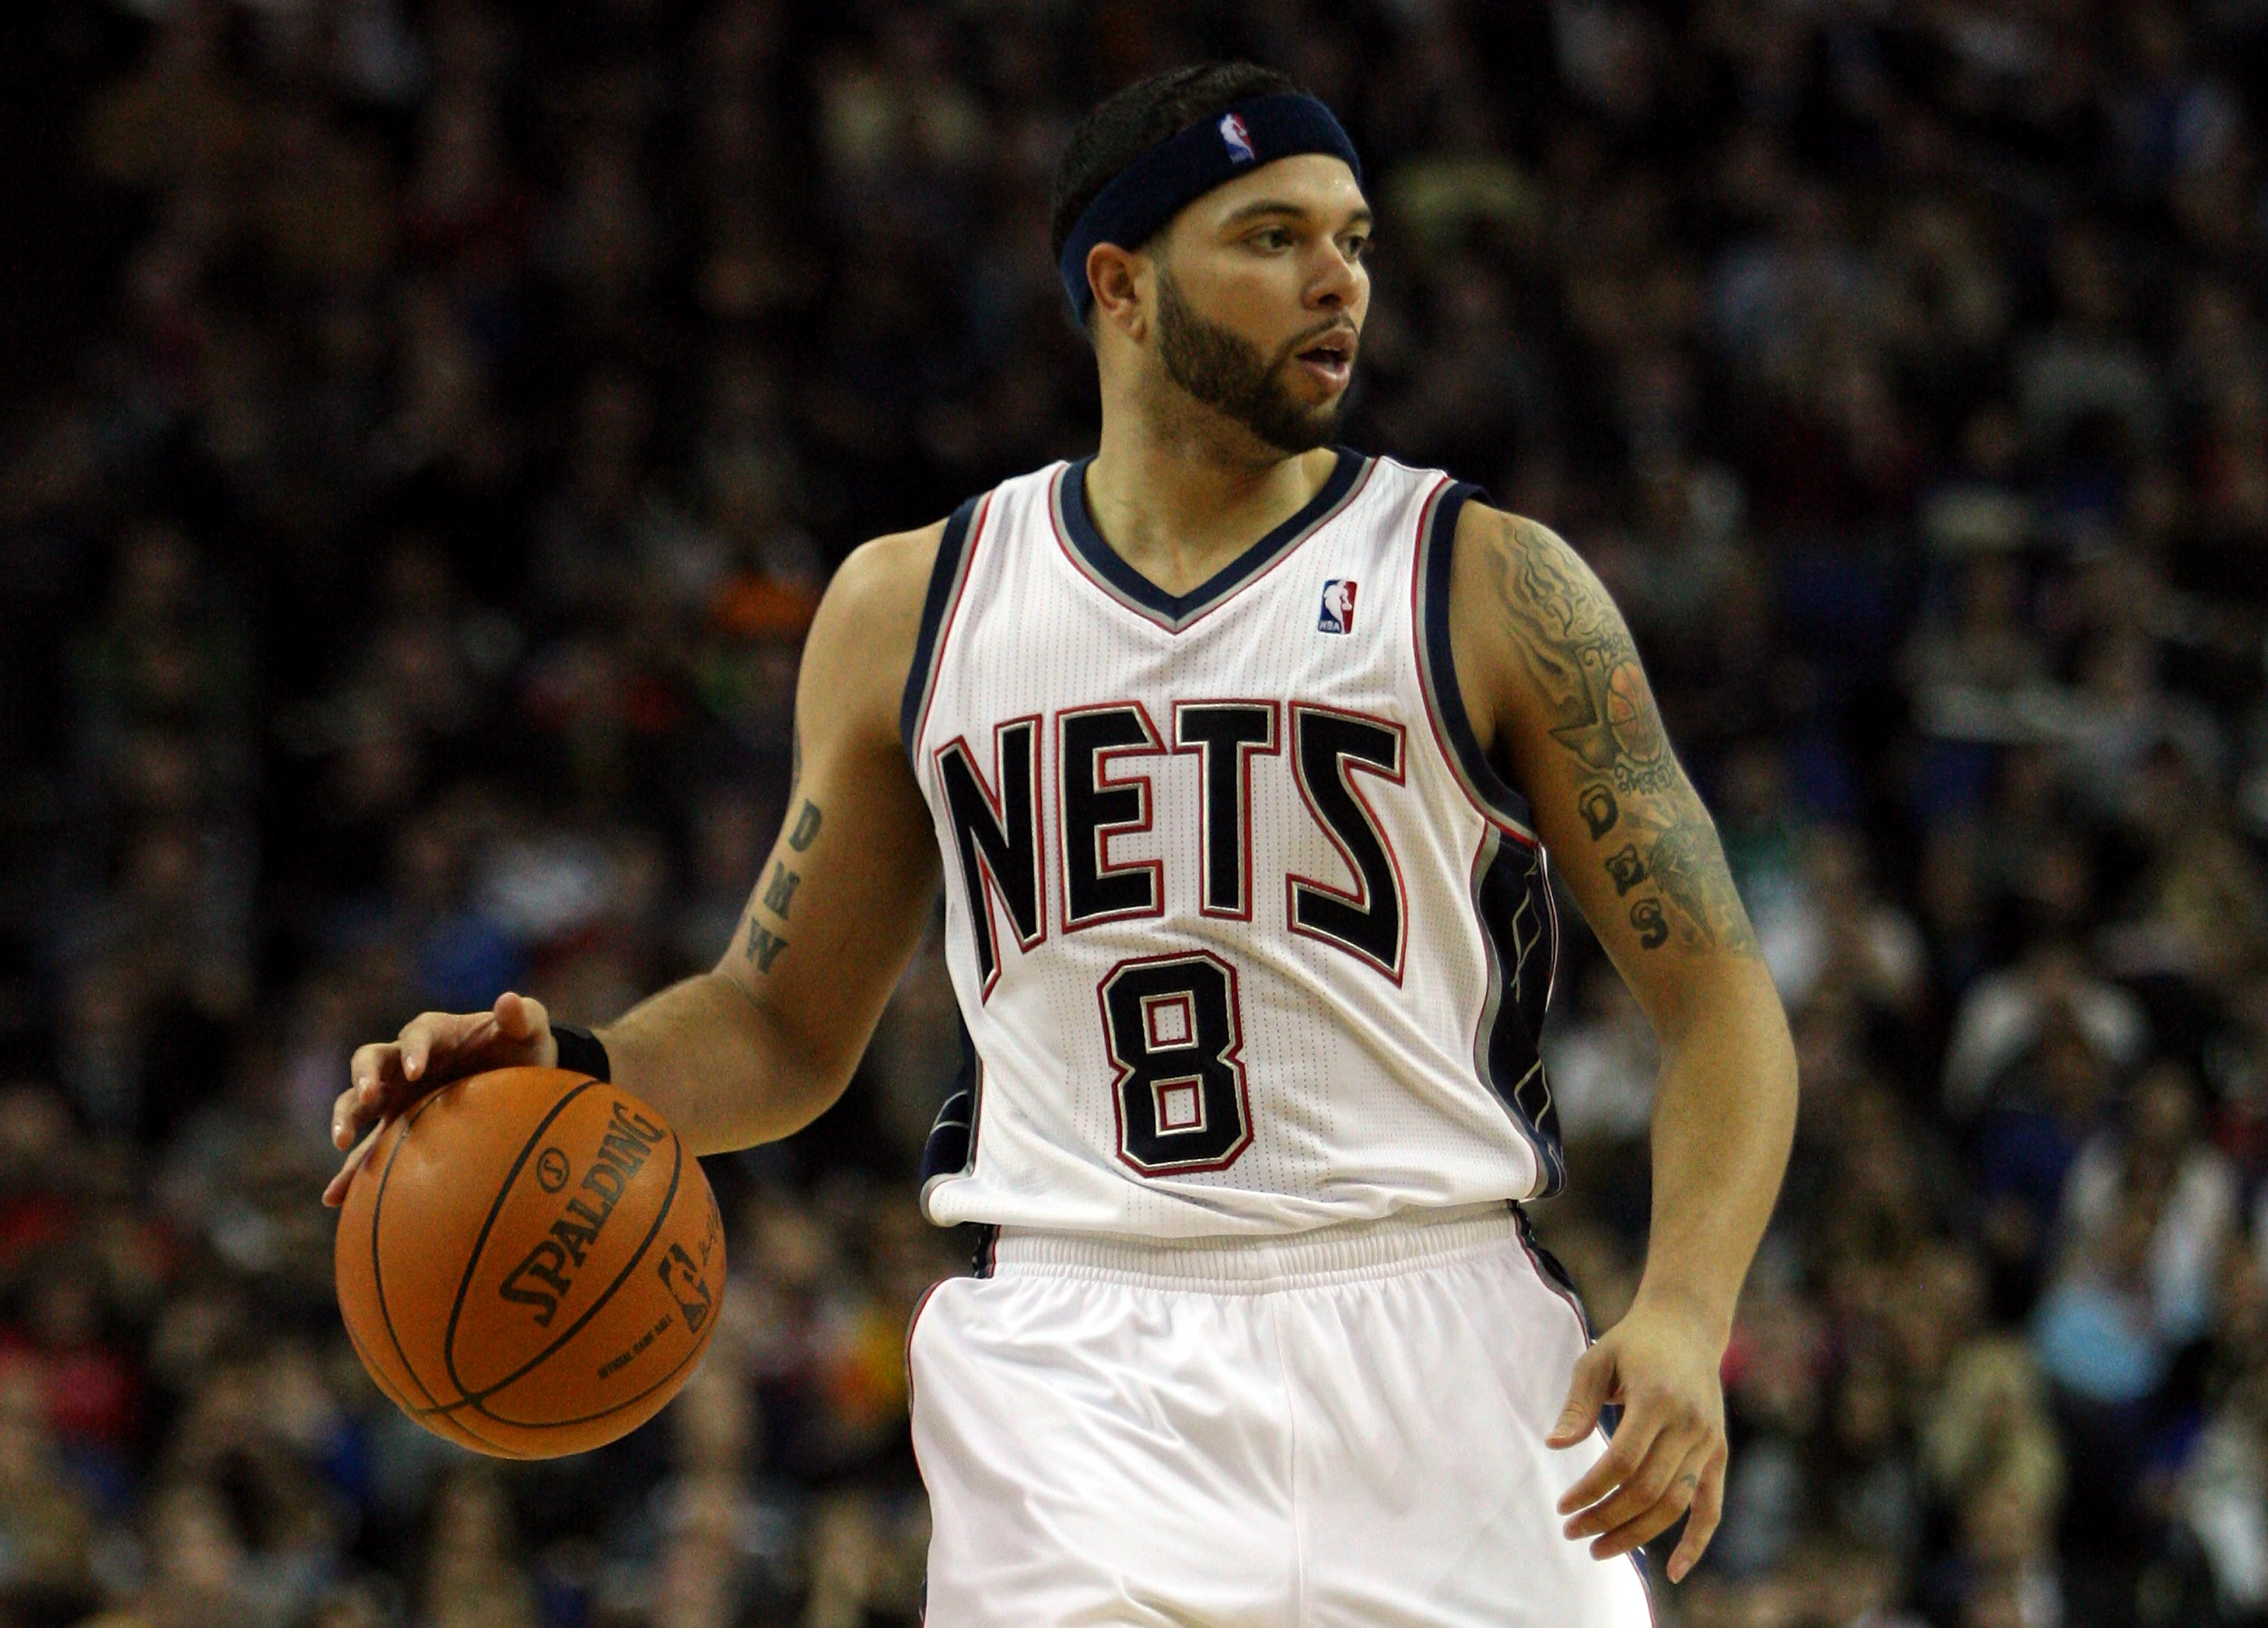 LONDON, ENGLAND - MARCH 04:  #8 Deron Williams of the Nets in action during the NBA match between New Jersey Nets and the Toronto Raptors at the O2 Arena on March 4, 2011 in London, England. NOTE TO USER: User expressly acknowledges and agrees that, by do